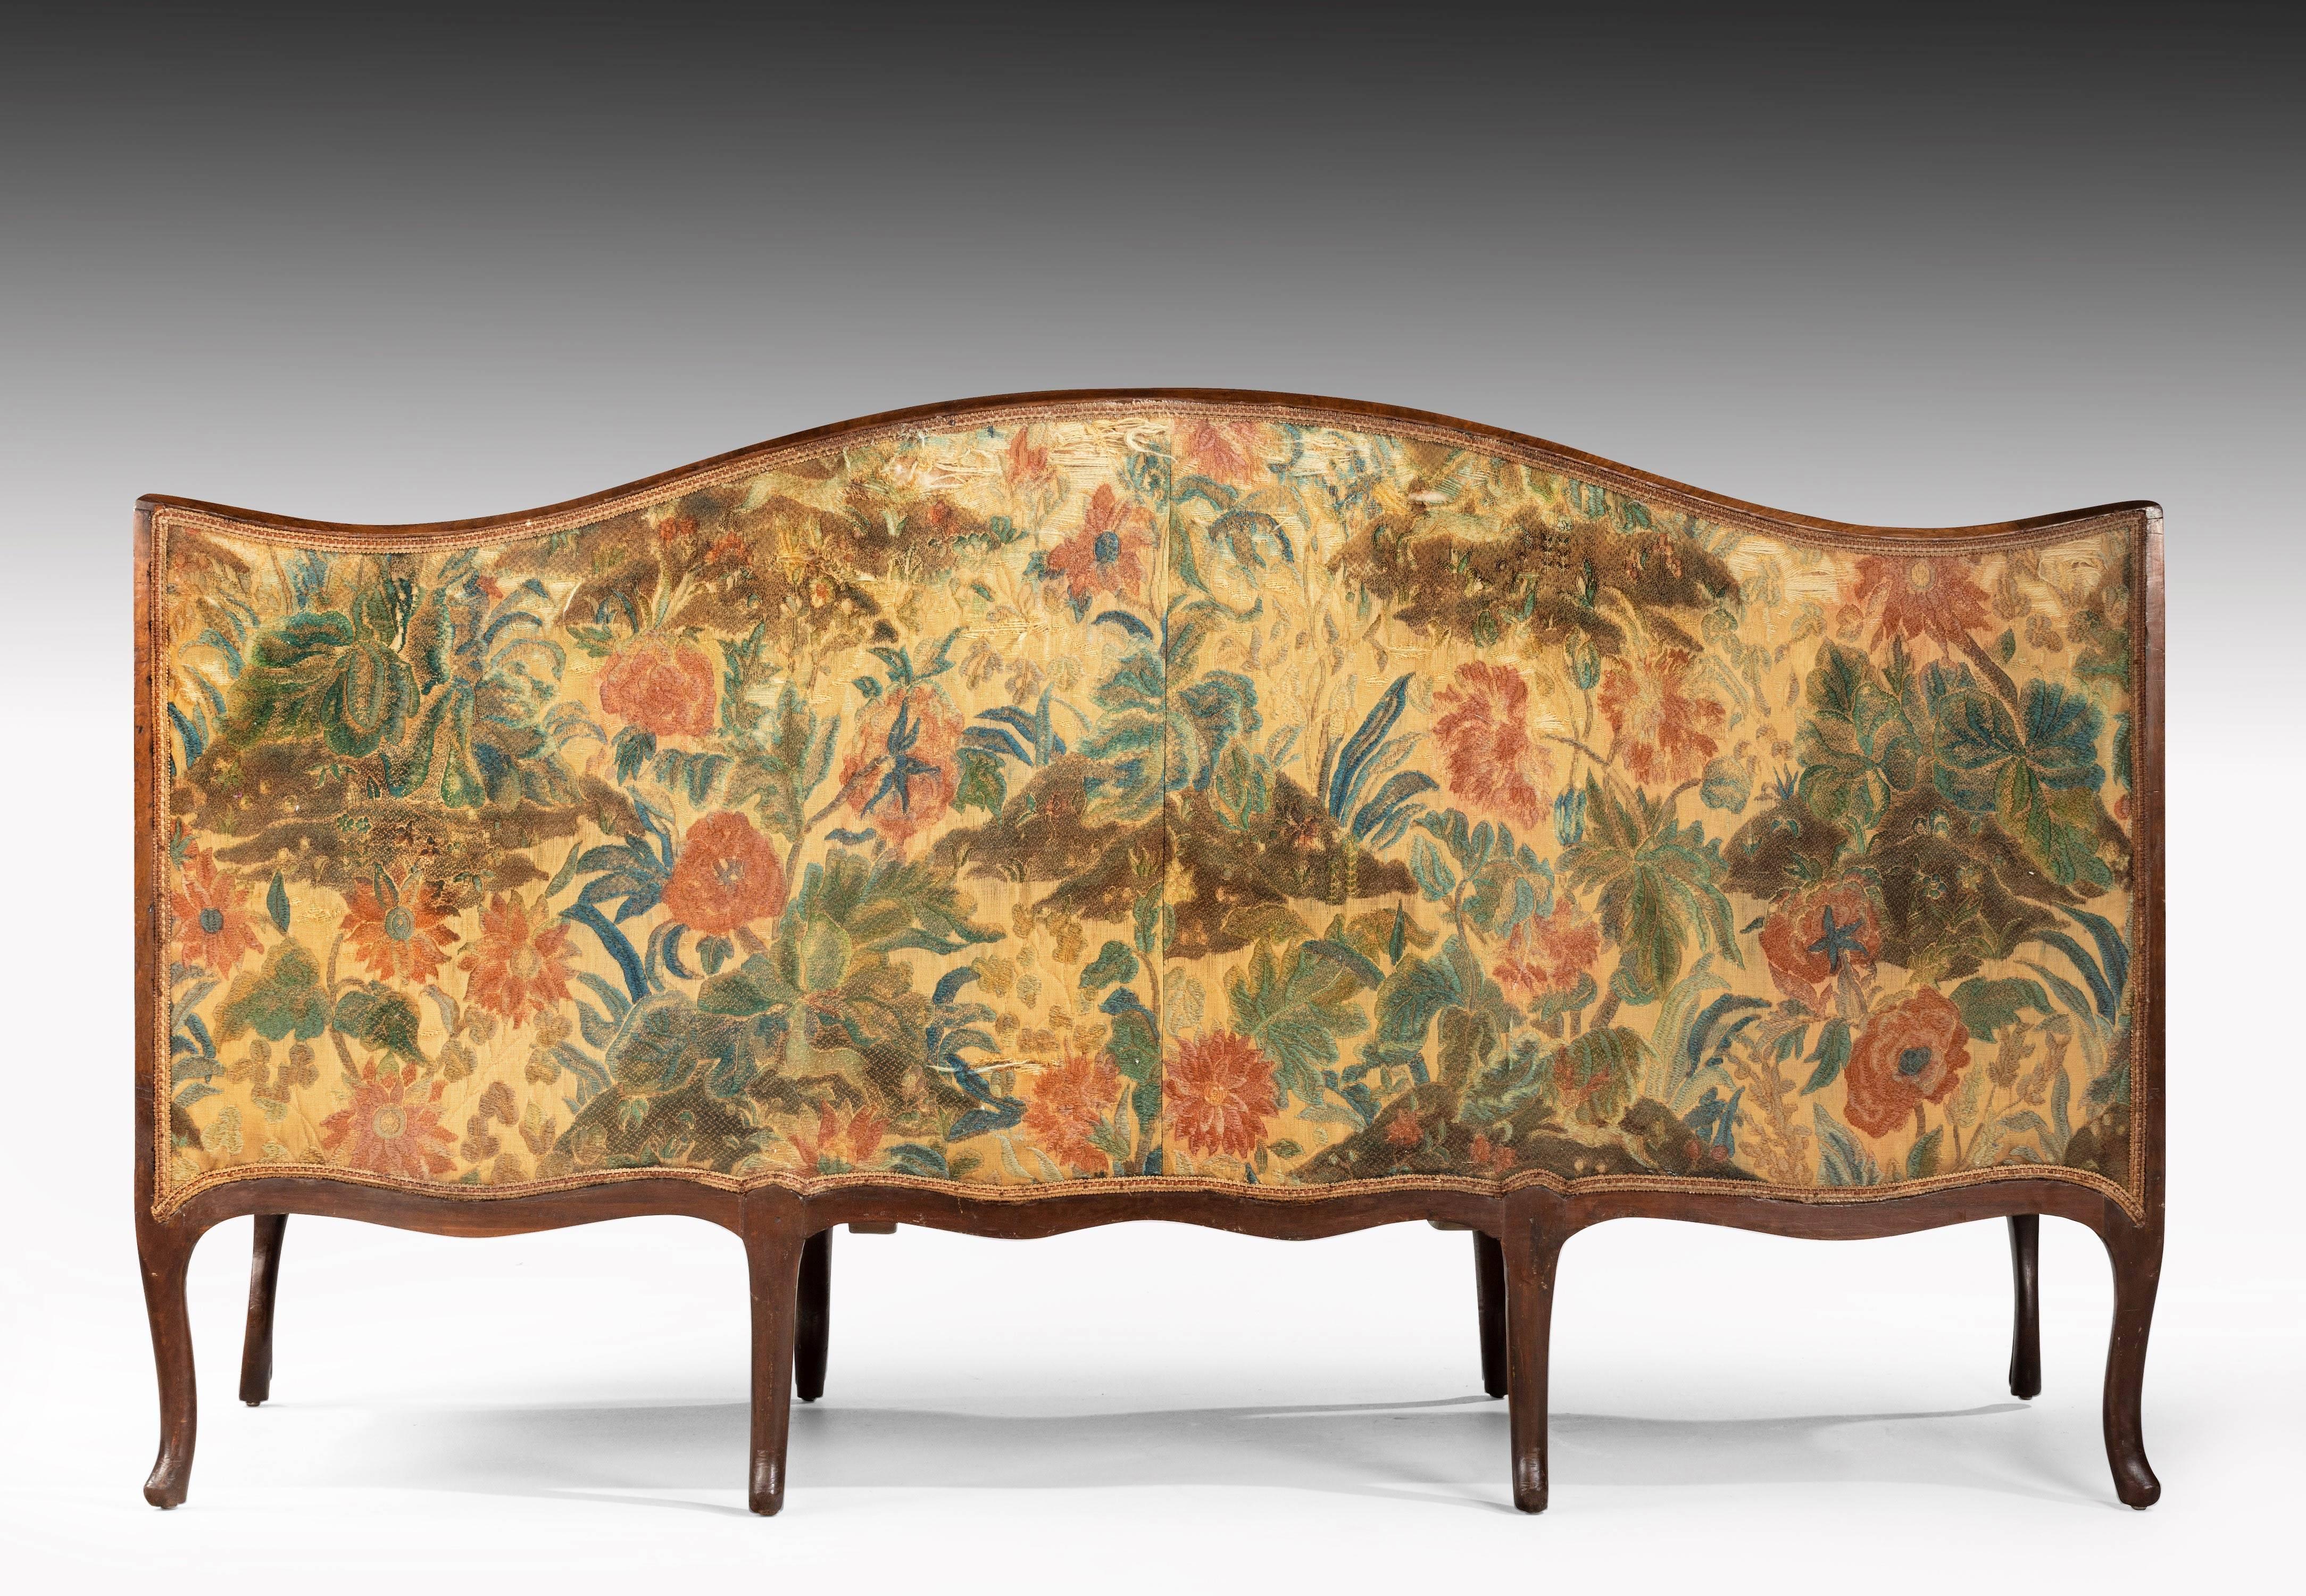 George III Period Mahogany Framed Tapestry Sofa In Good Condition In Peterborough, Northamptonshire